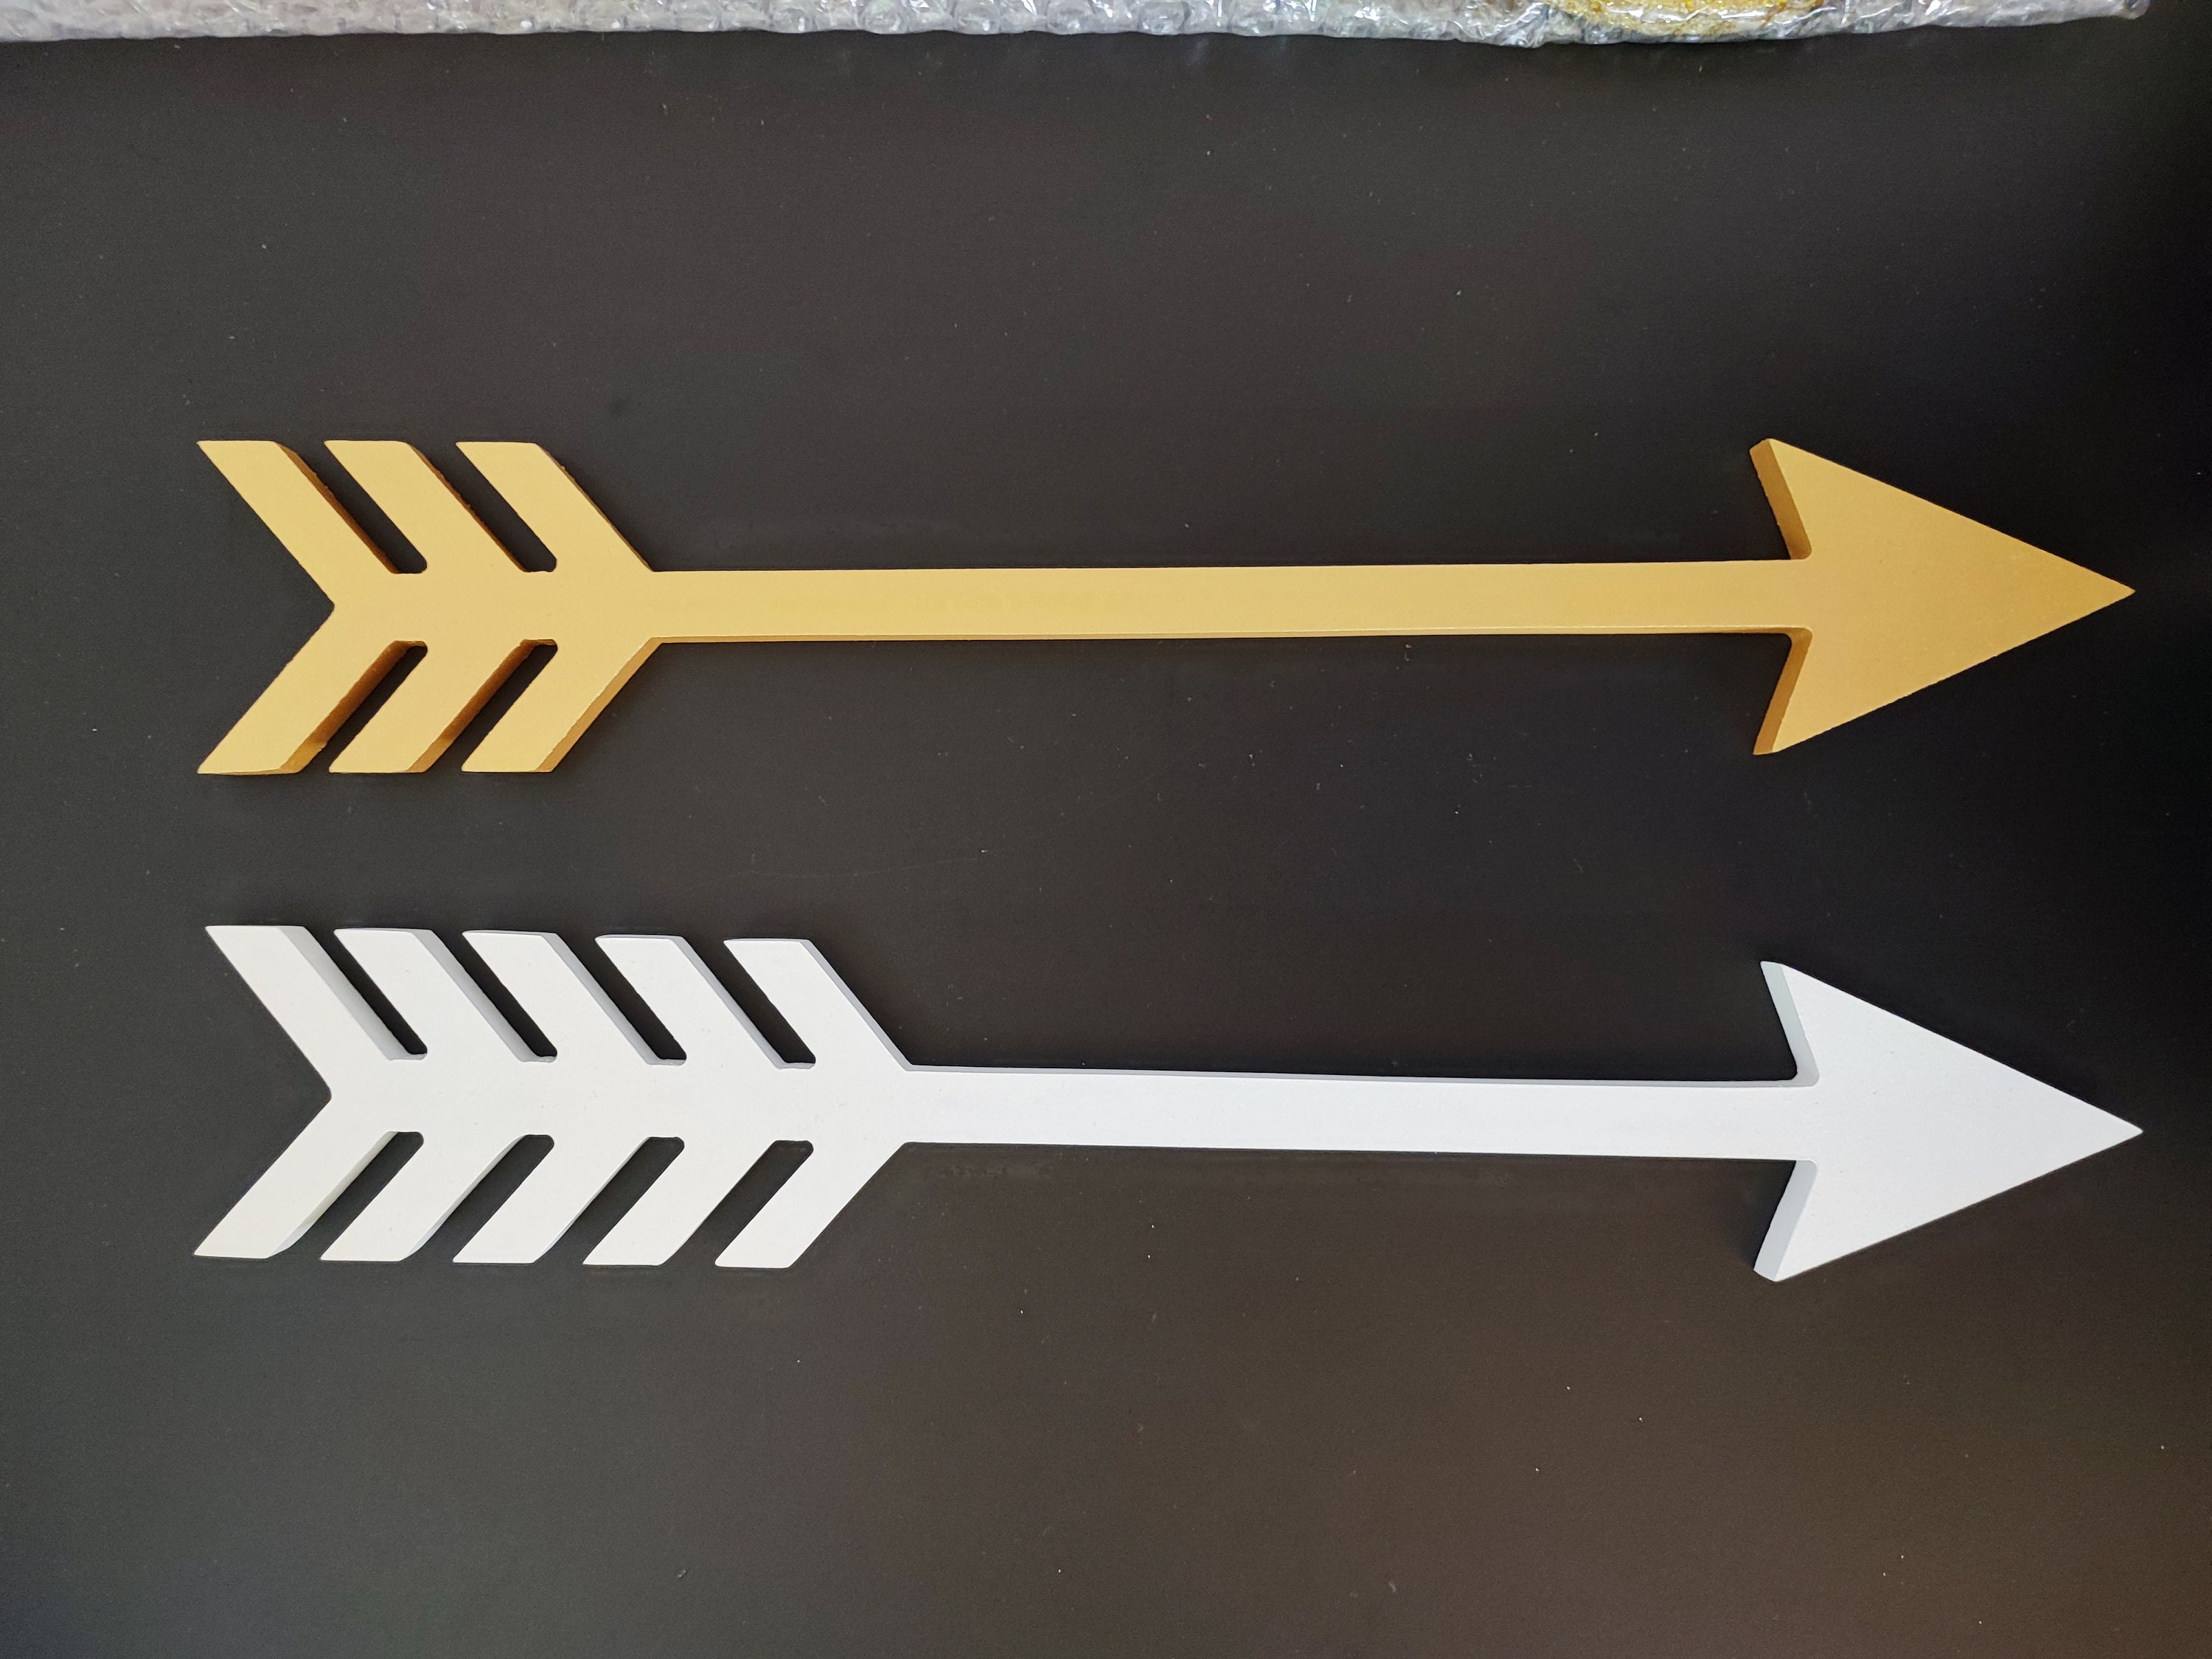 2 Large Wooden Arrows for Wall, Wooden Arrow Wall Decor, Wall